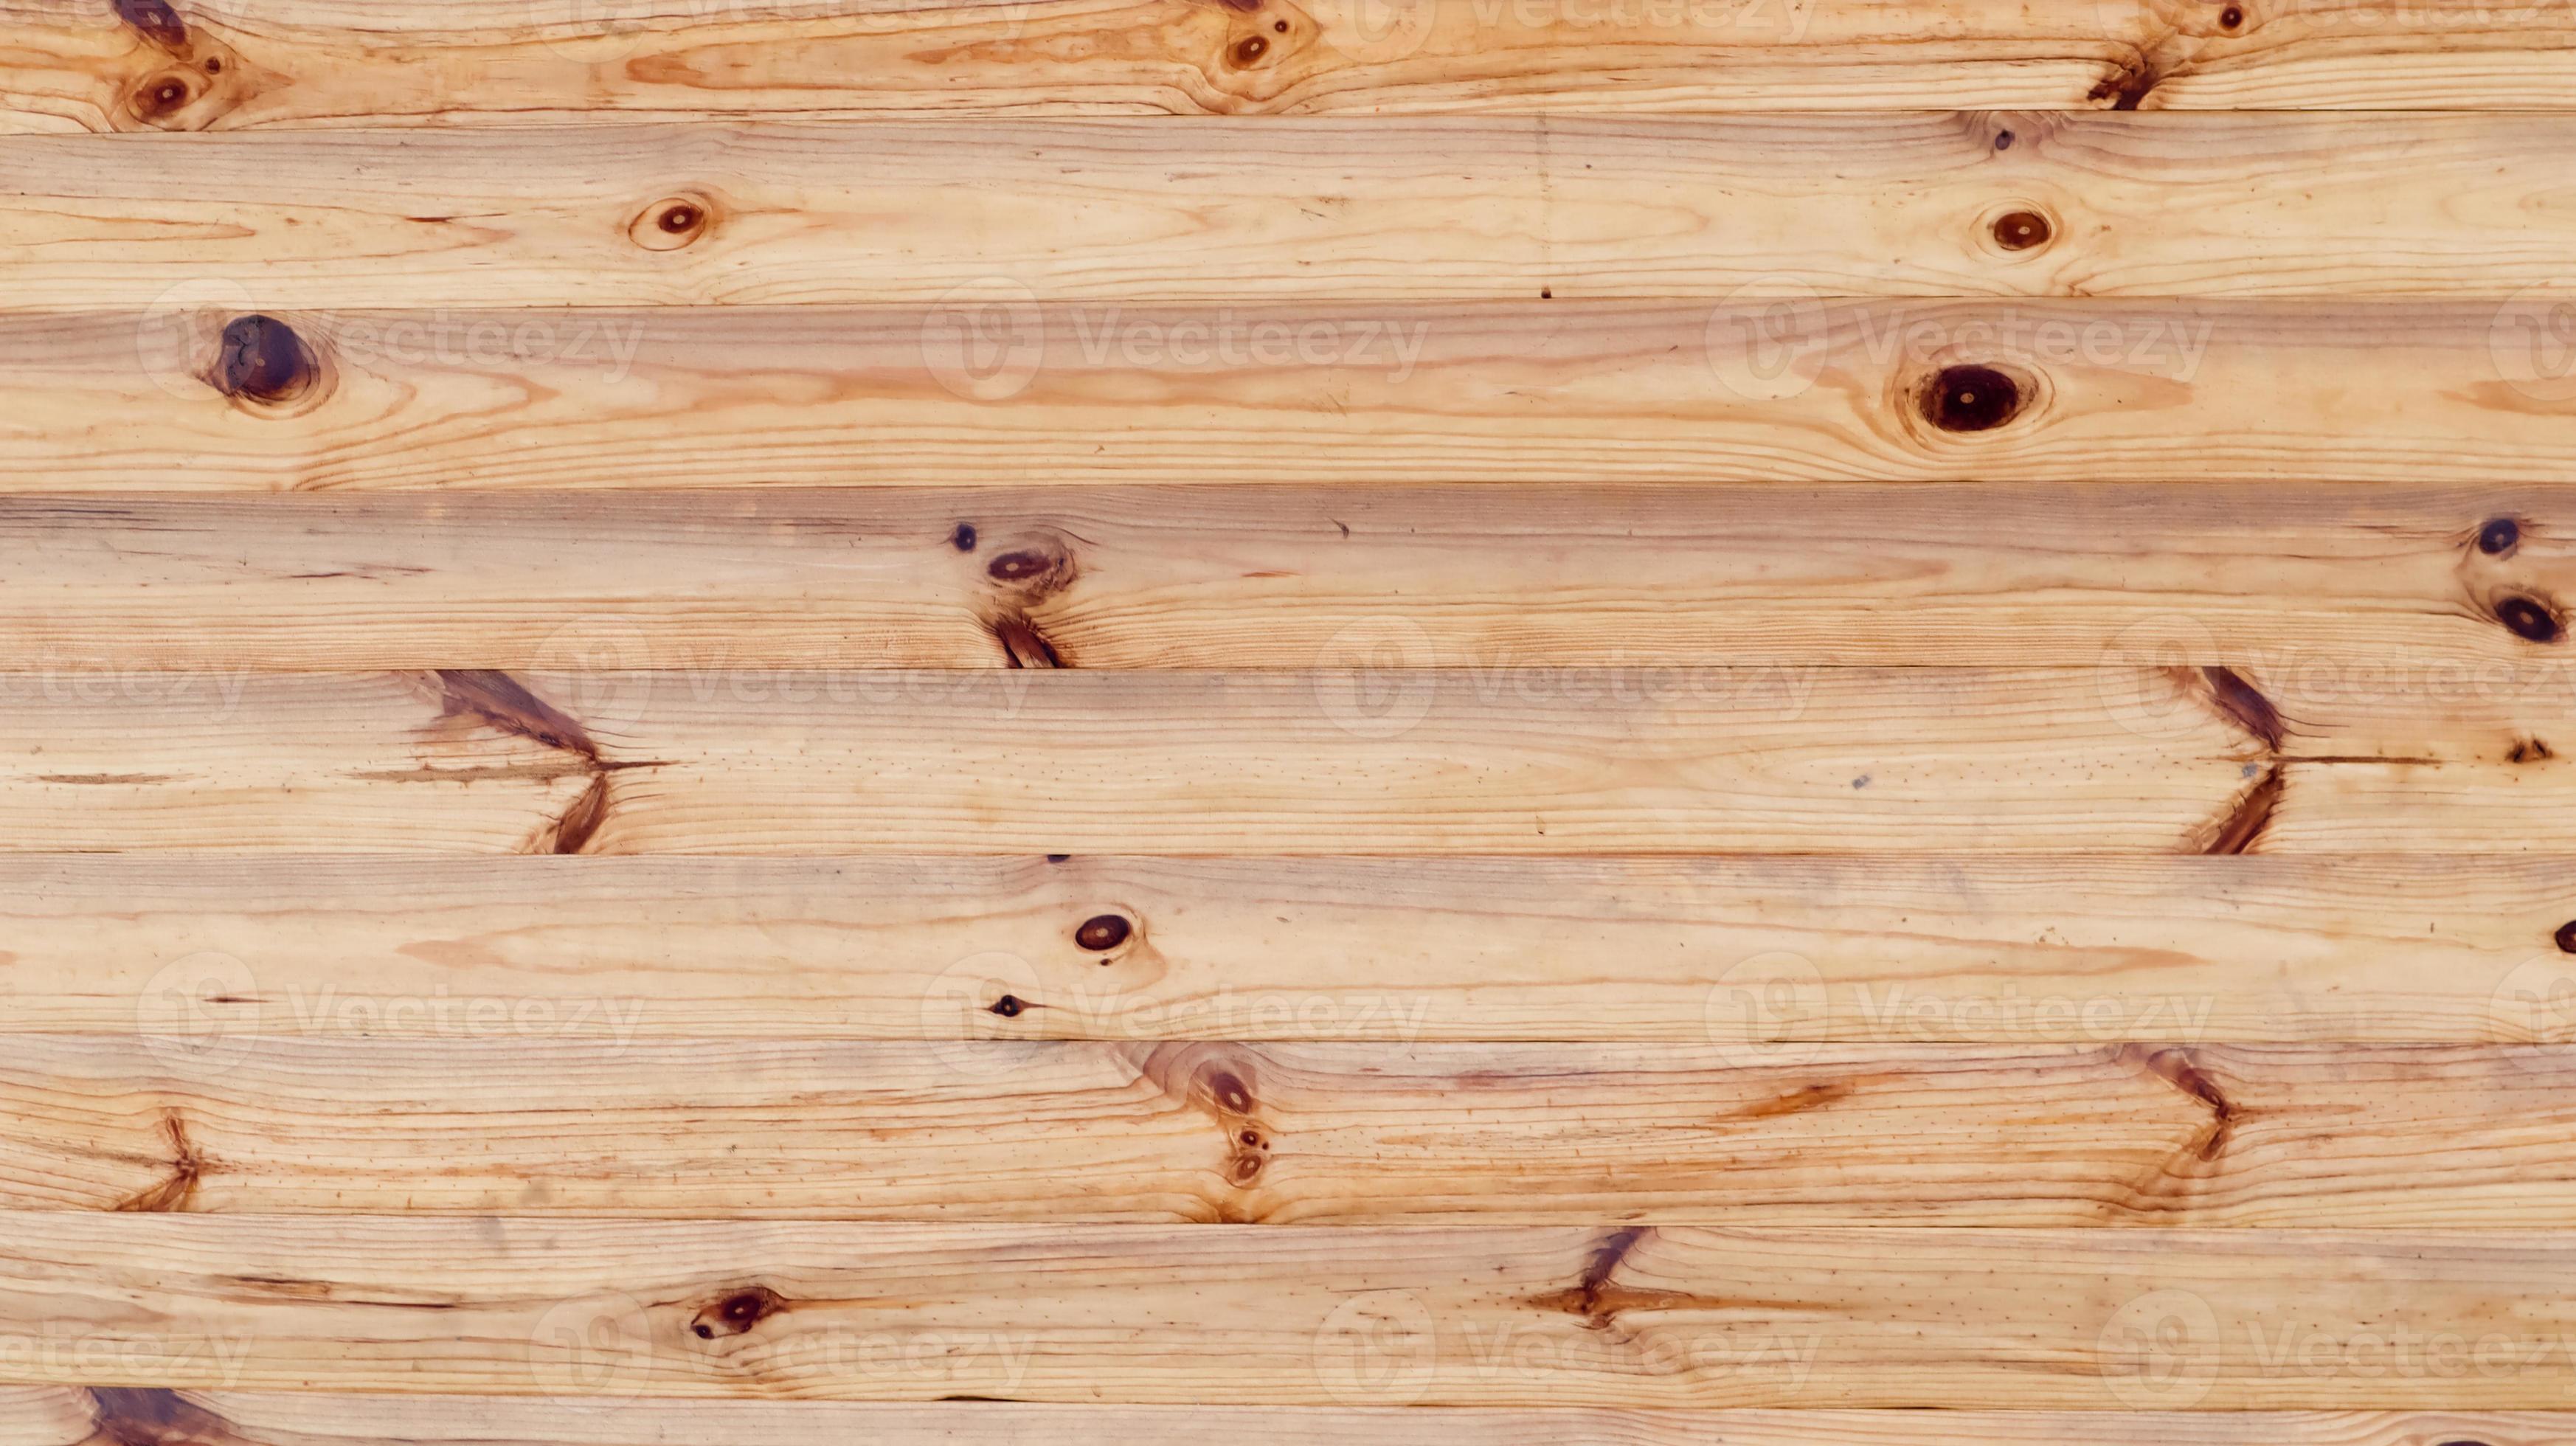 https://static.vecteezy.com/system/resources/previews/004/536/219/large_2x/brown-rustic-wood-texture-background-natural-background-pattern-from-a-log-wall-facade-of-a-log-house-copy-space-a-board-with-lots-of-horizontal-wooden-logs-photo.jpg